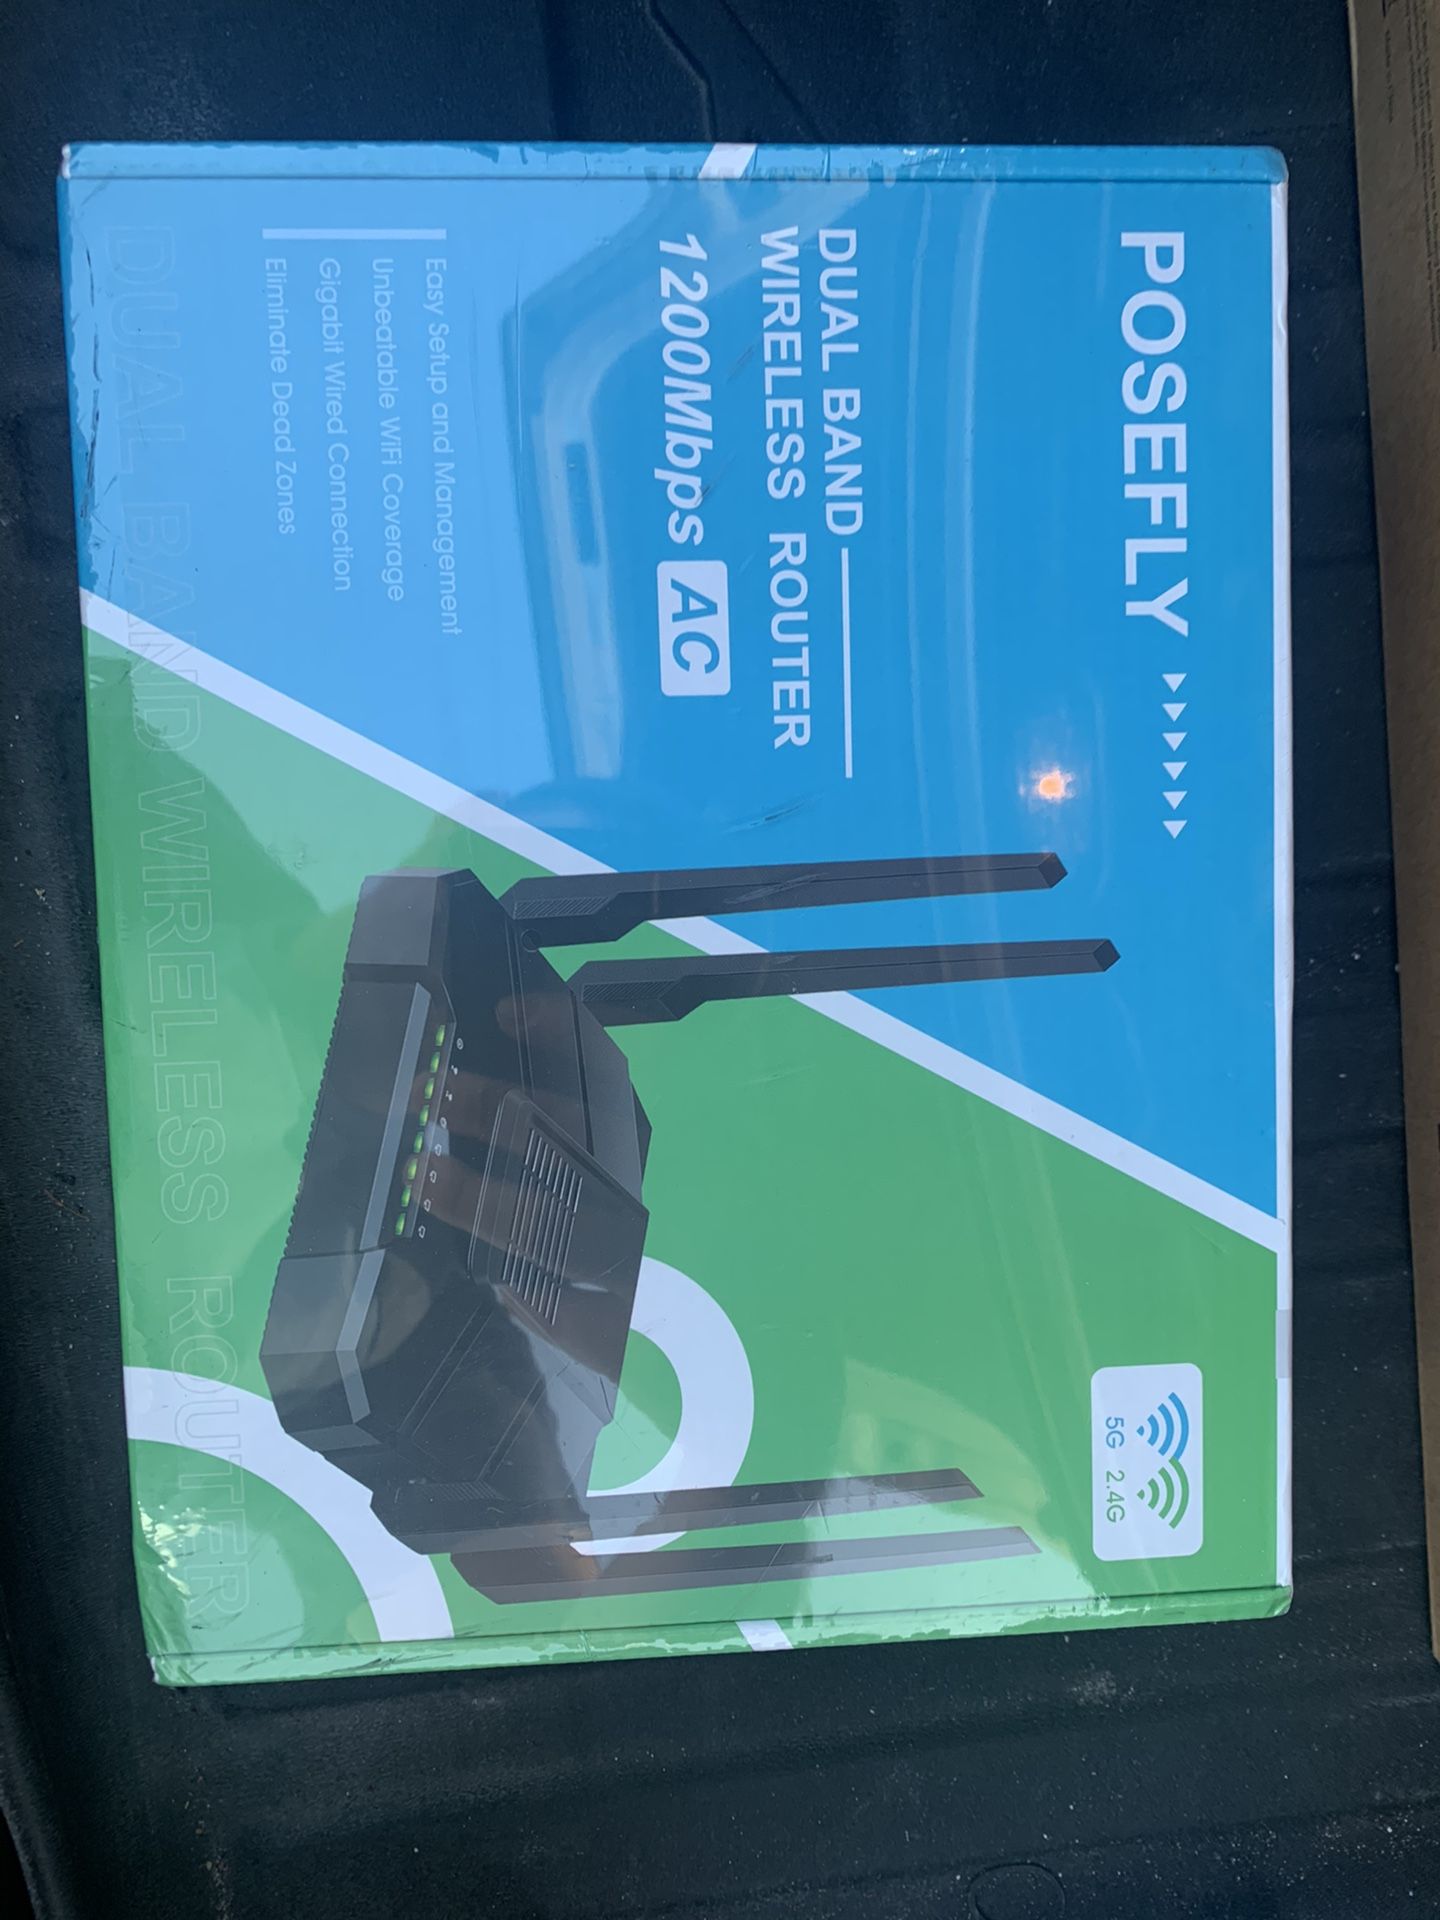 Posefly dual band wireless router